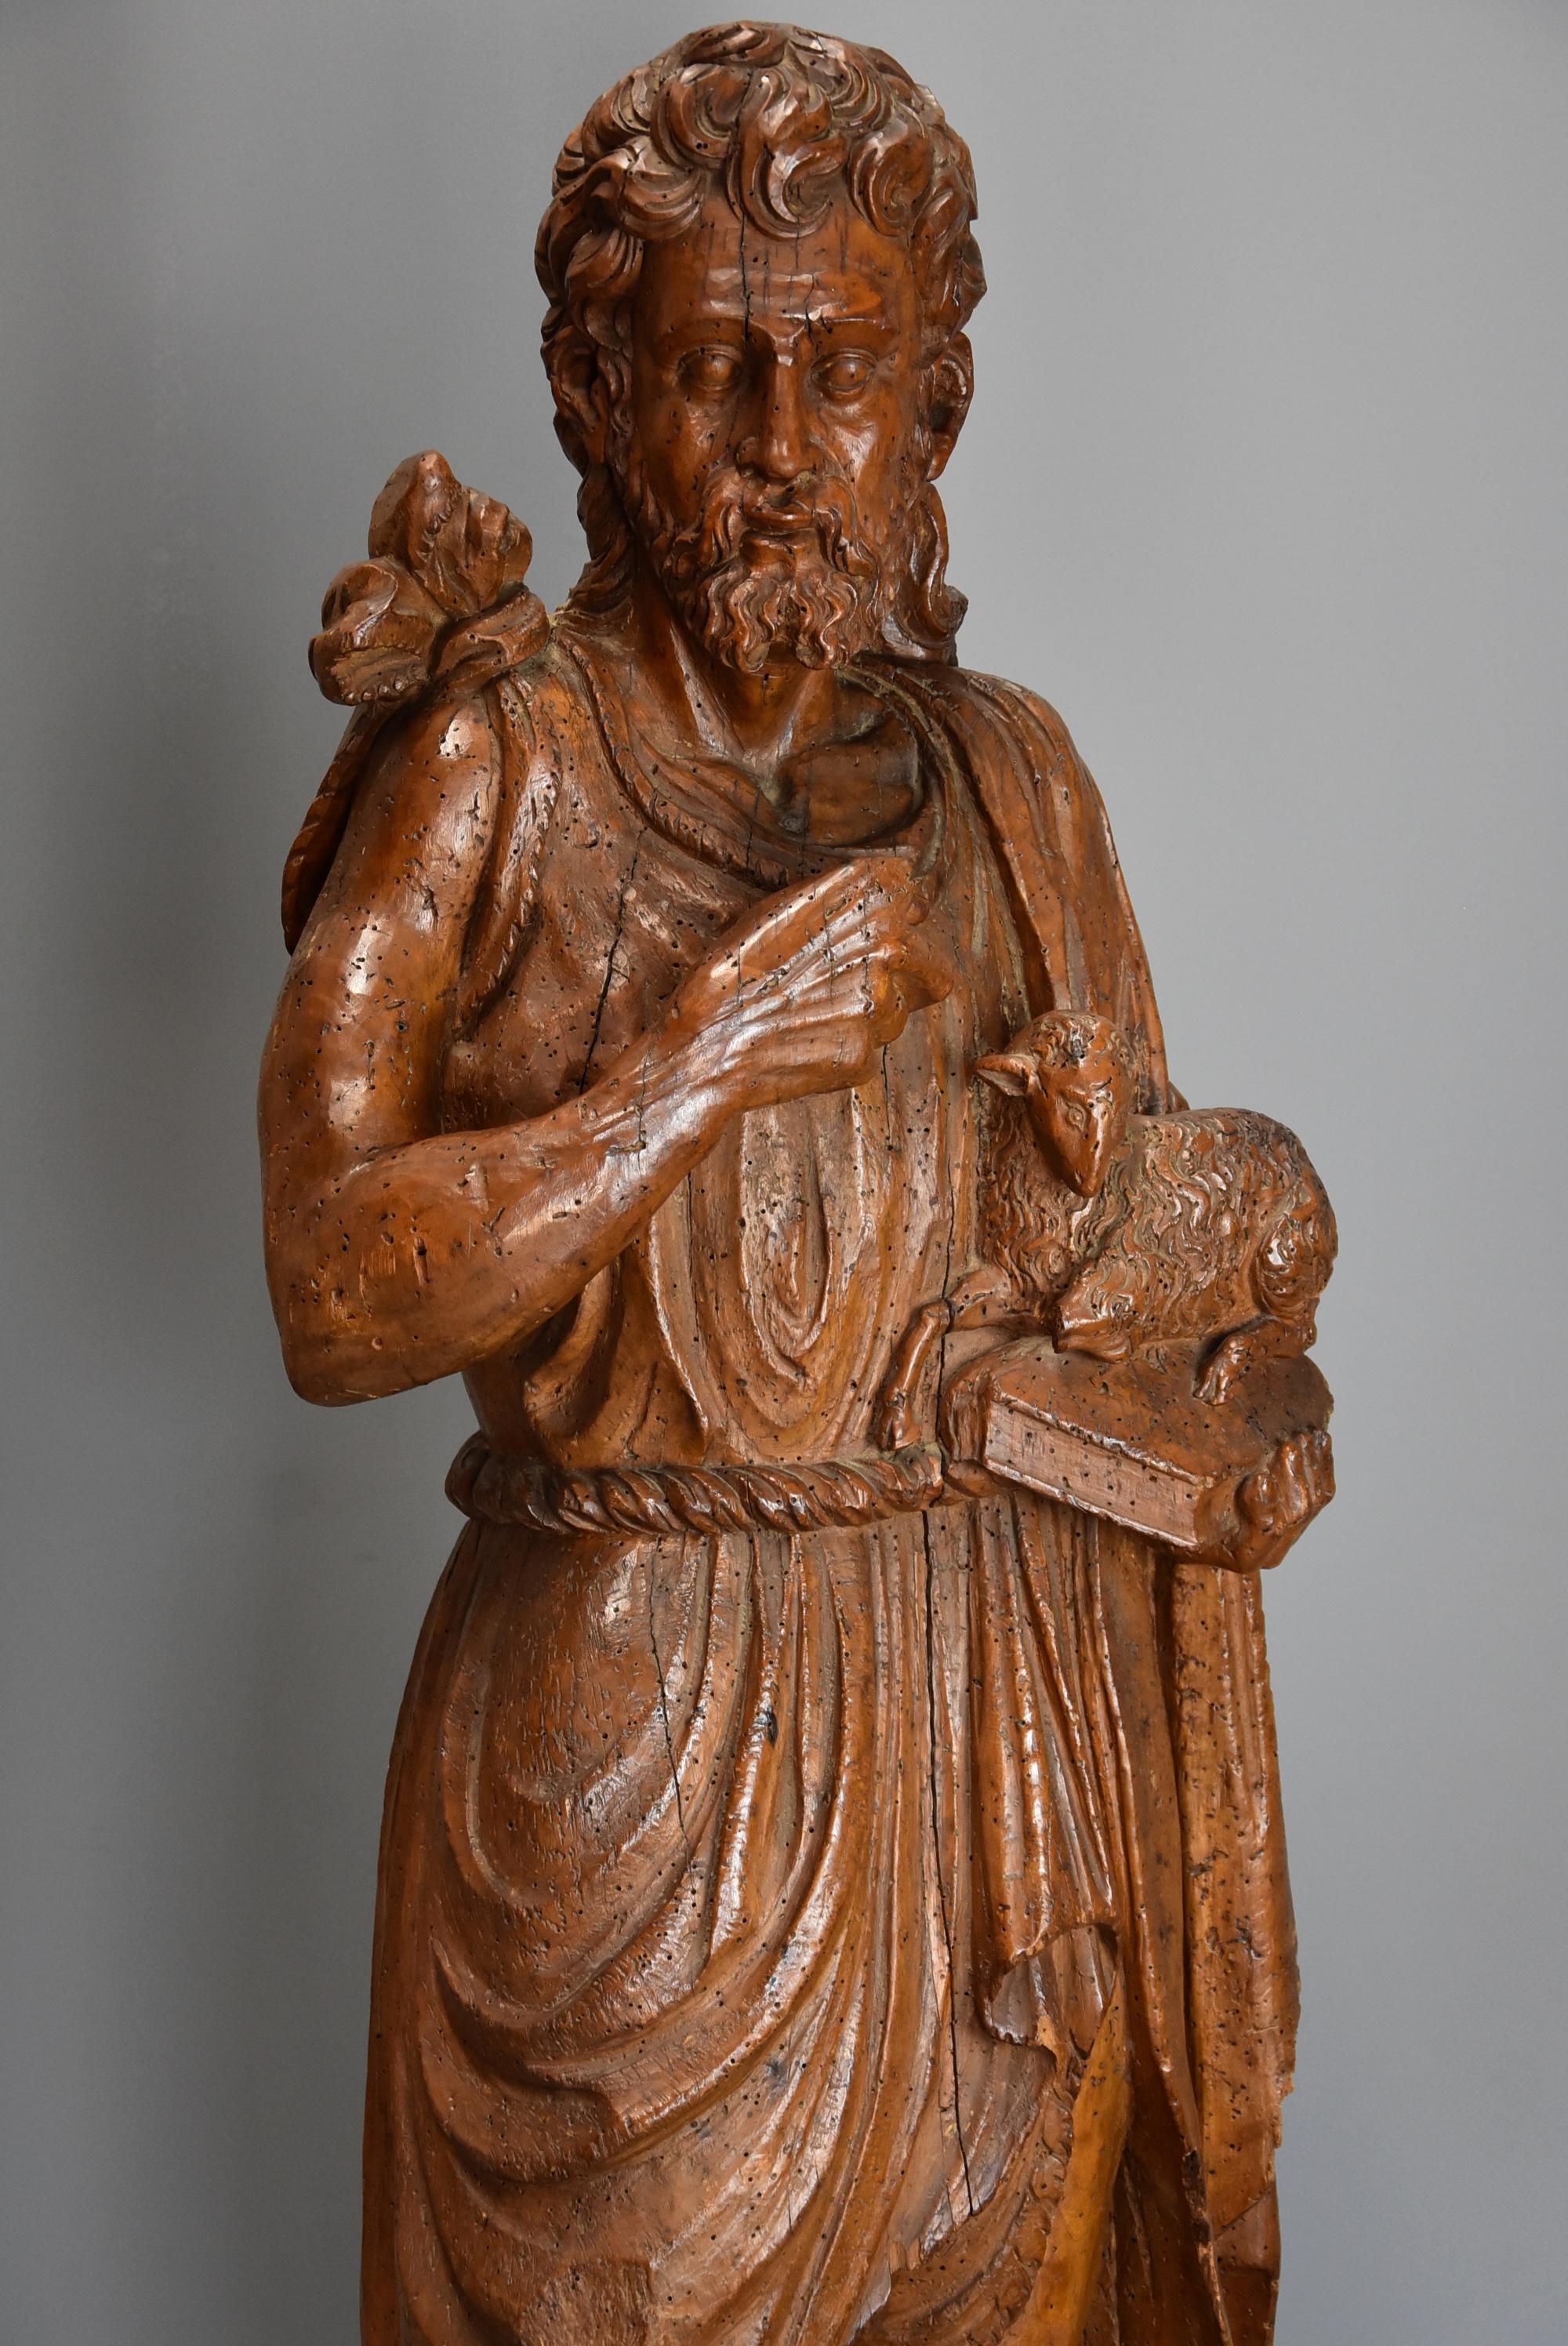 A large Continental mid-16th century (circa 1550) carved limewood figure of St. John the Baptist.

St. John is stands in a draped robe holding a book with a lamb upon it, all supported on later wooden plinth with moulded edge.

St. John is often